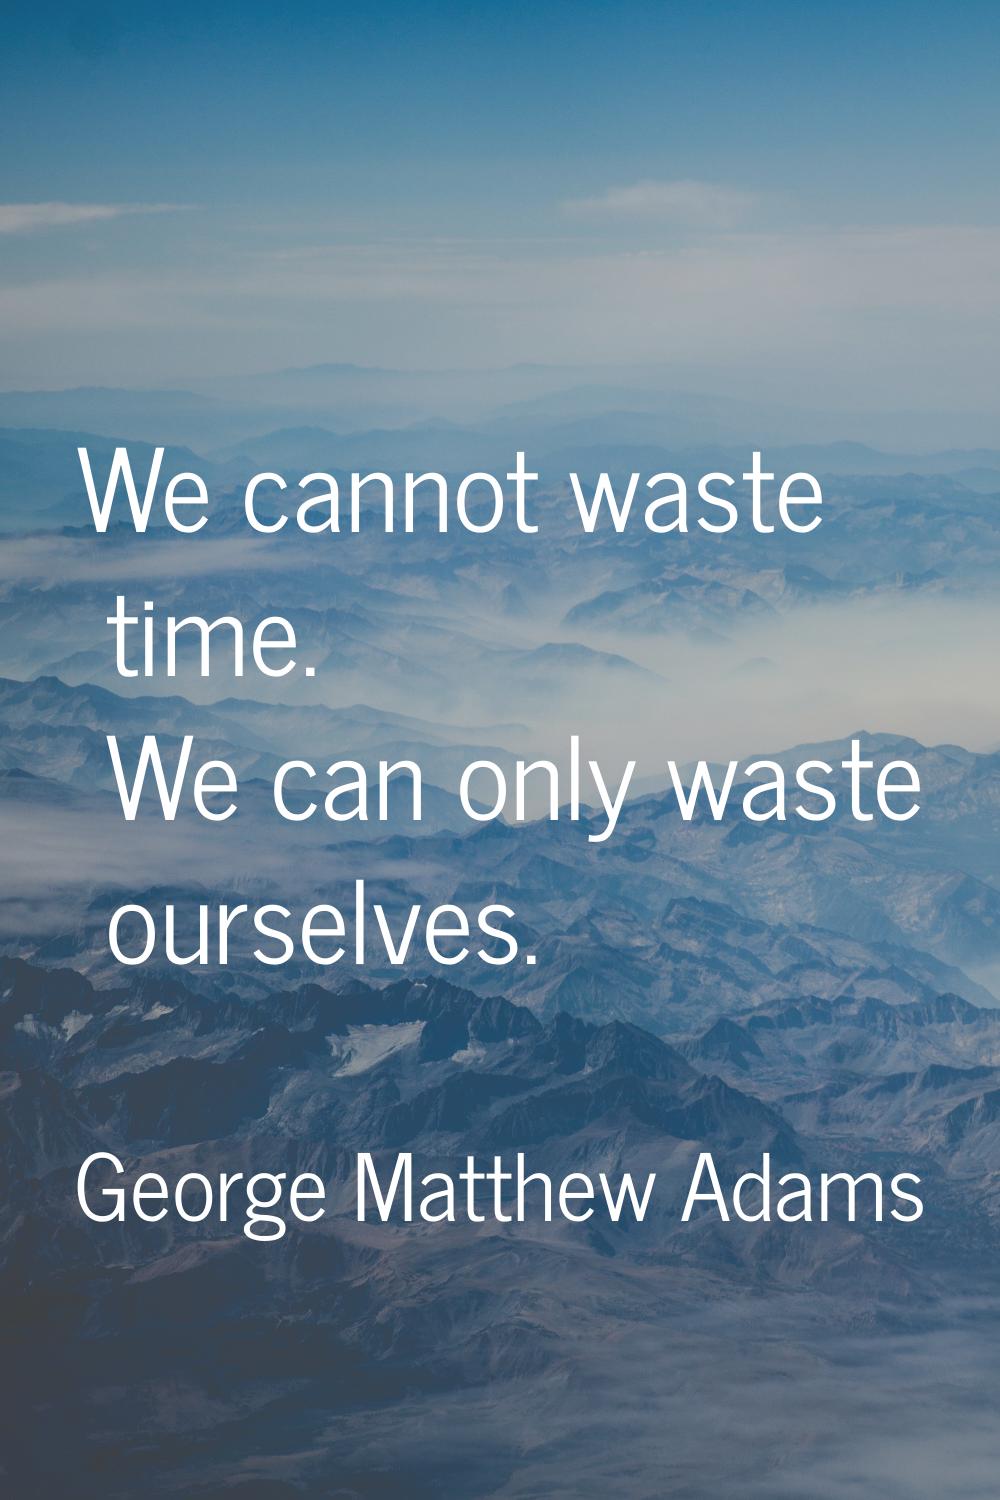 We cannot waste time. We can only waste ourselves.